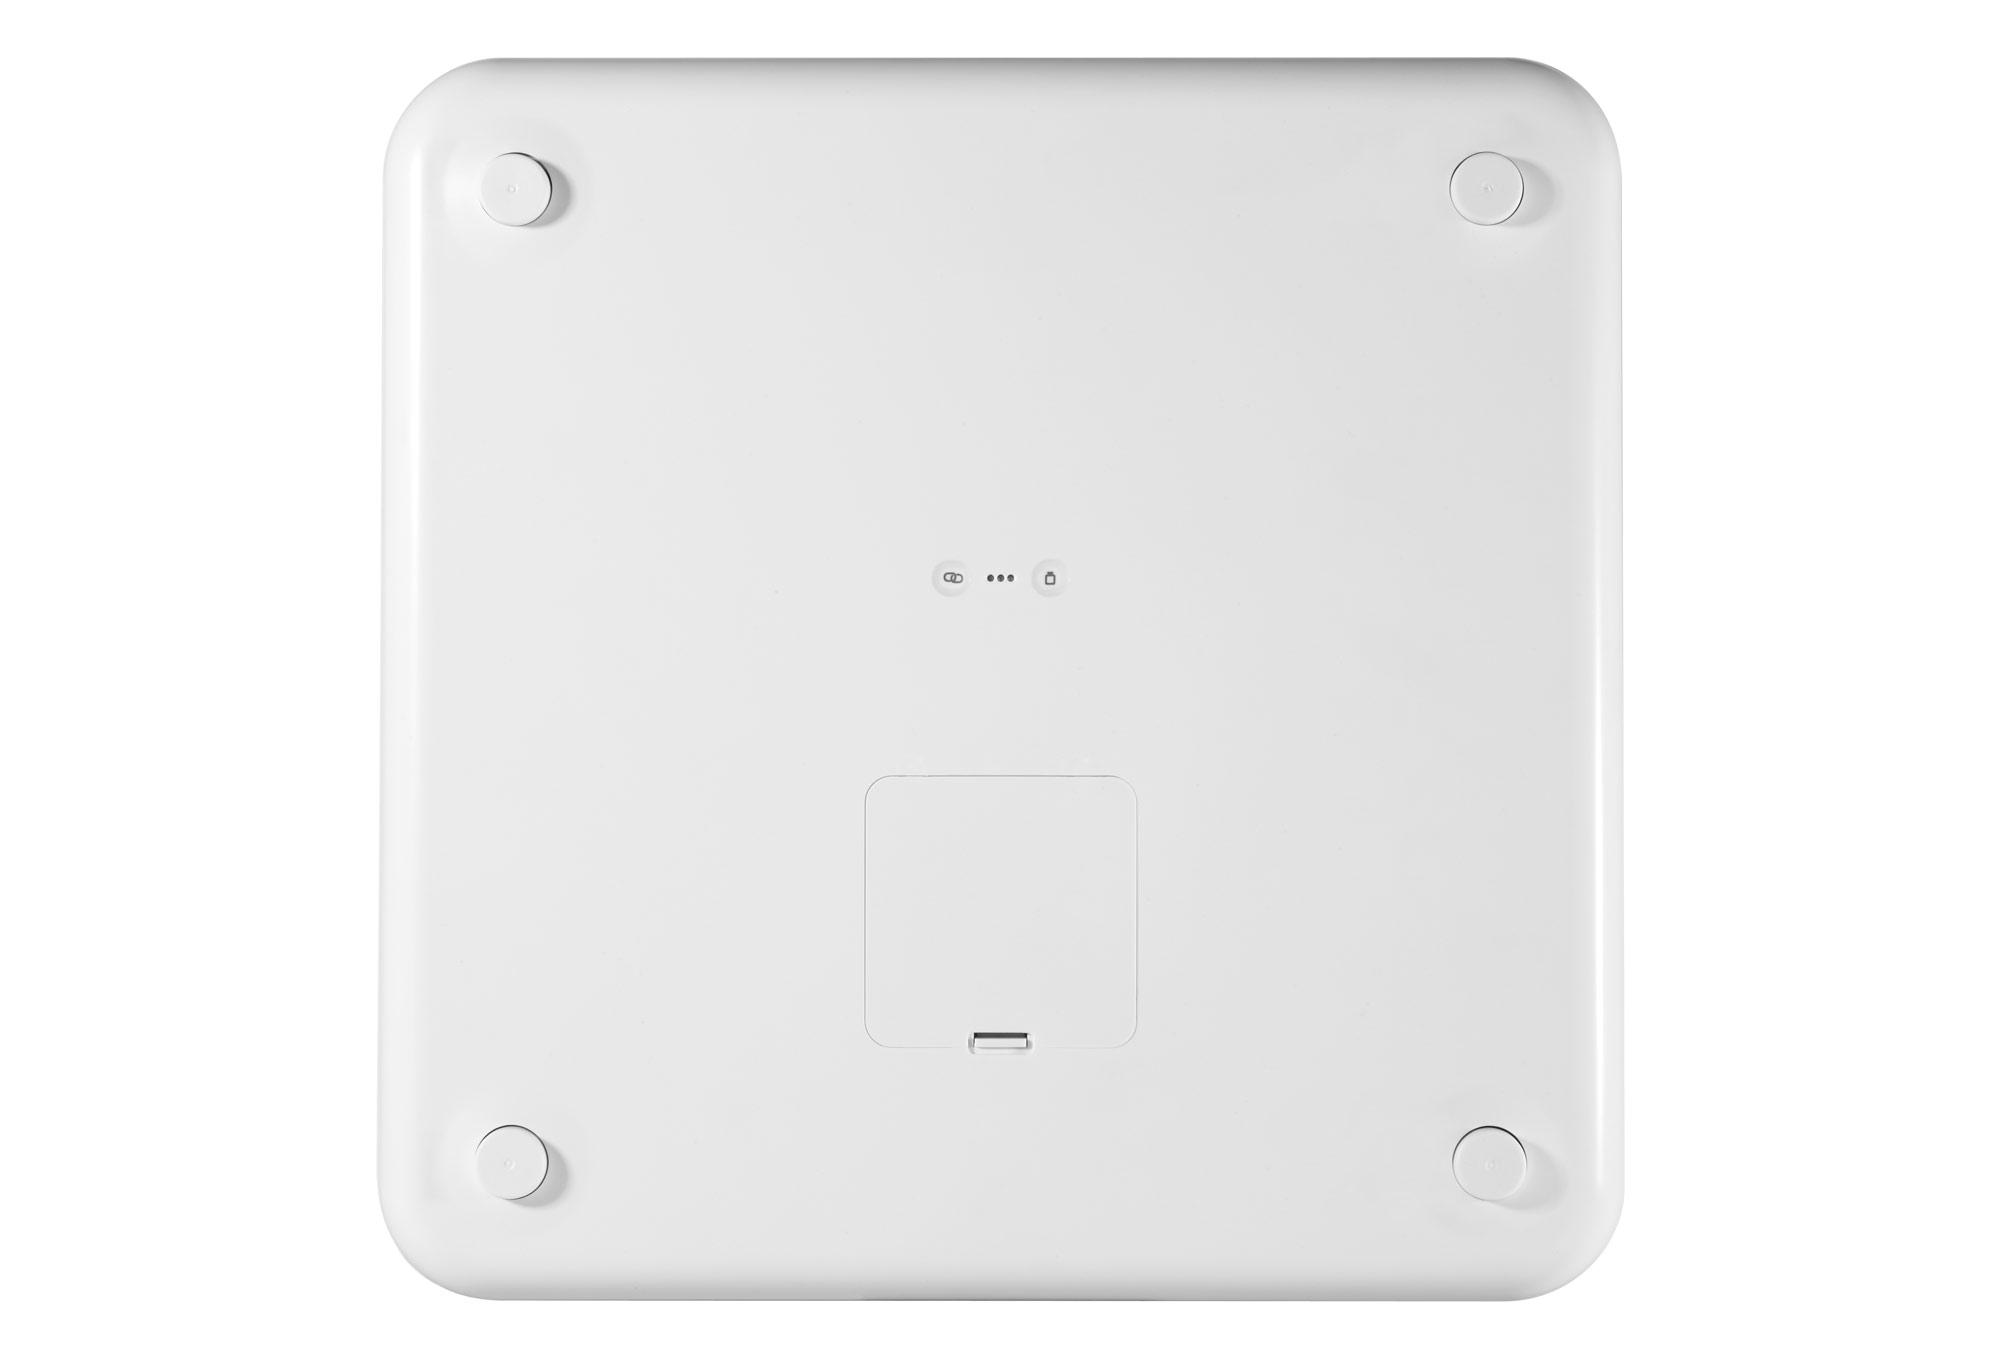 Withings WS-30 WH